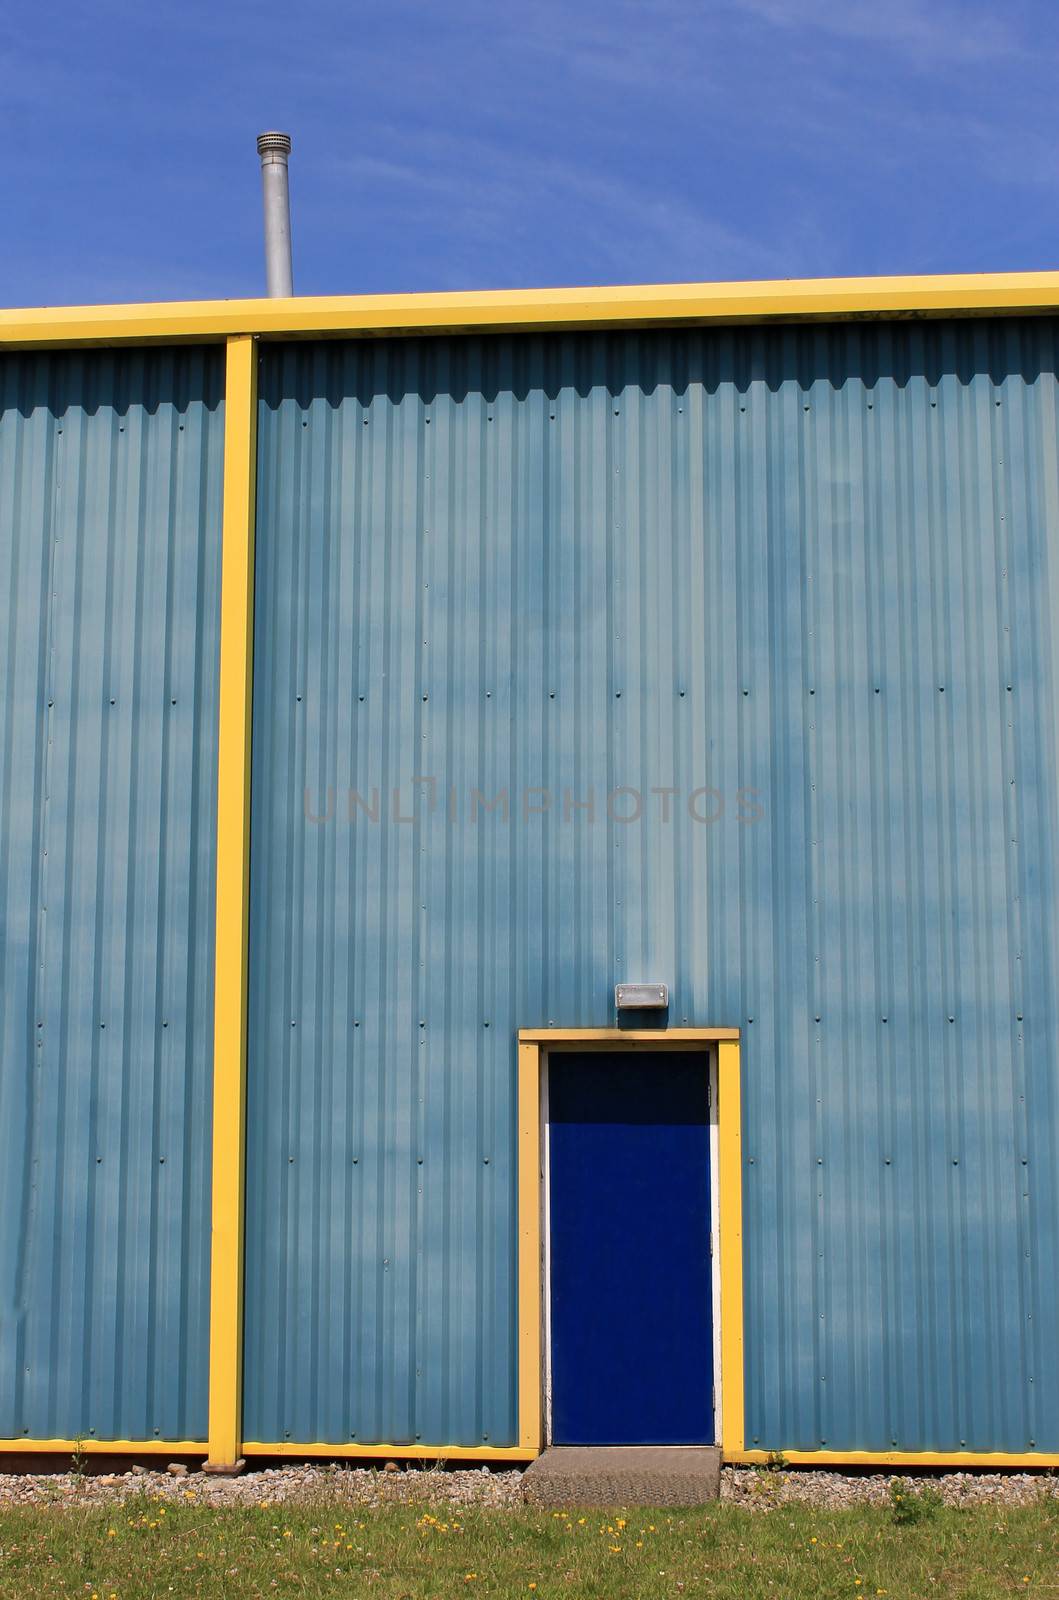 Exterior of blue and yellow modern warehouse building, sky background.